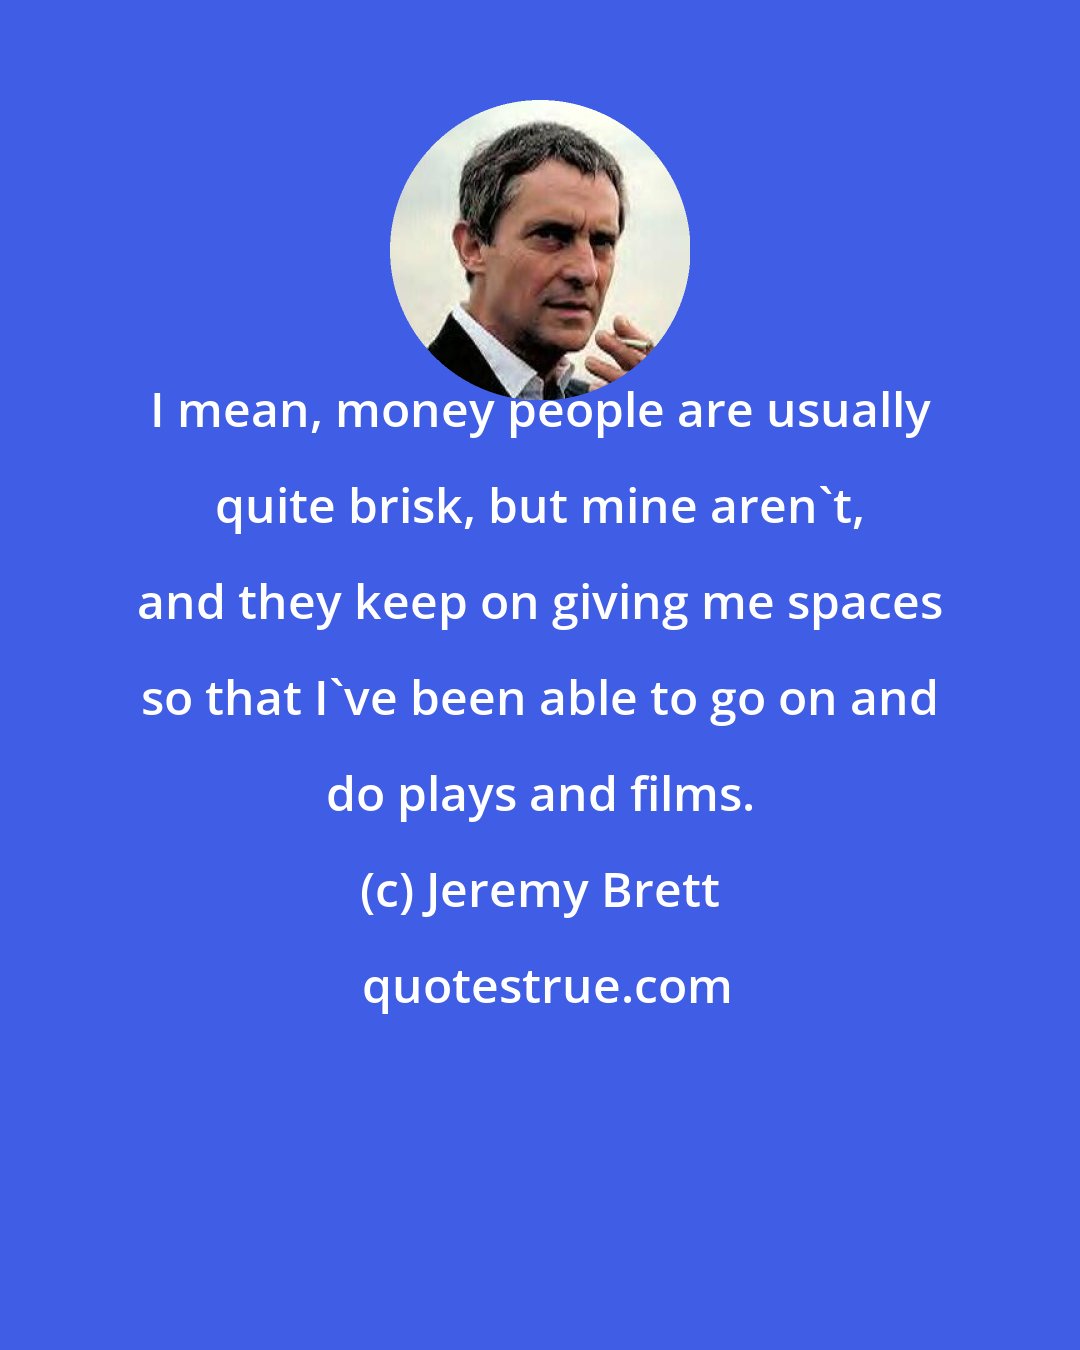 Jeremy Brett: I mean, money people are usually quite brisk, but mine aren't, and they keep on giving me spaces so that I've been able to go on and do plays and films.